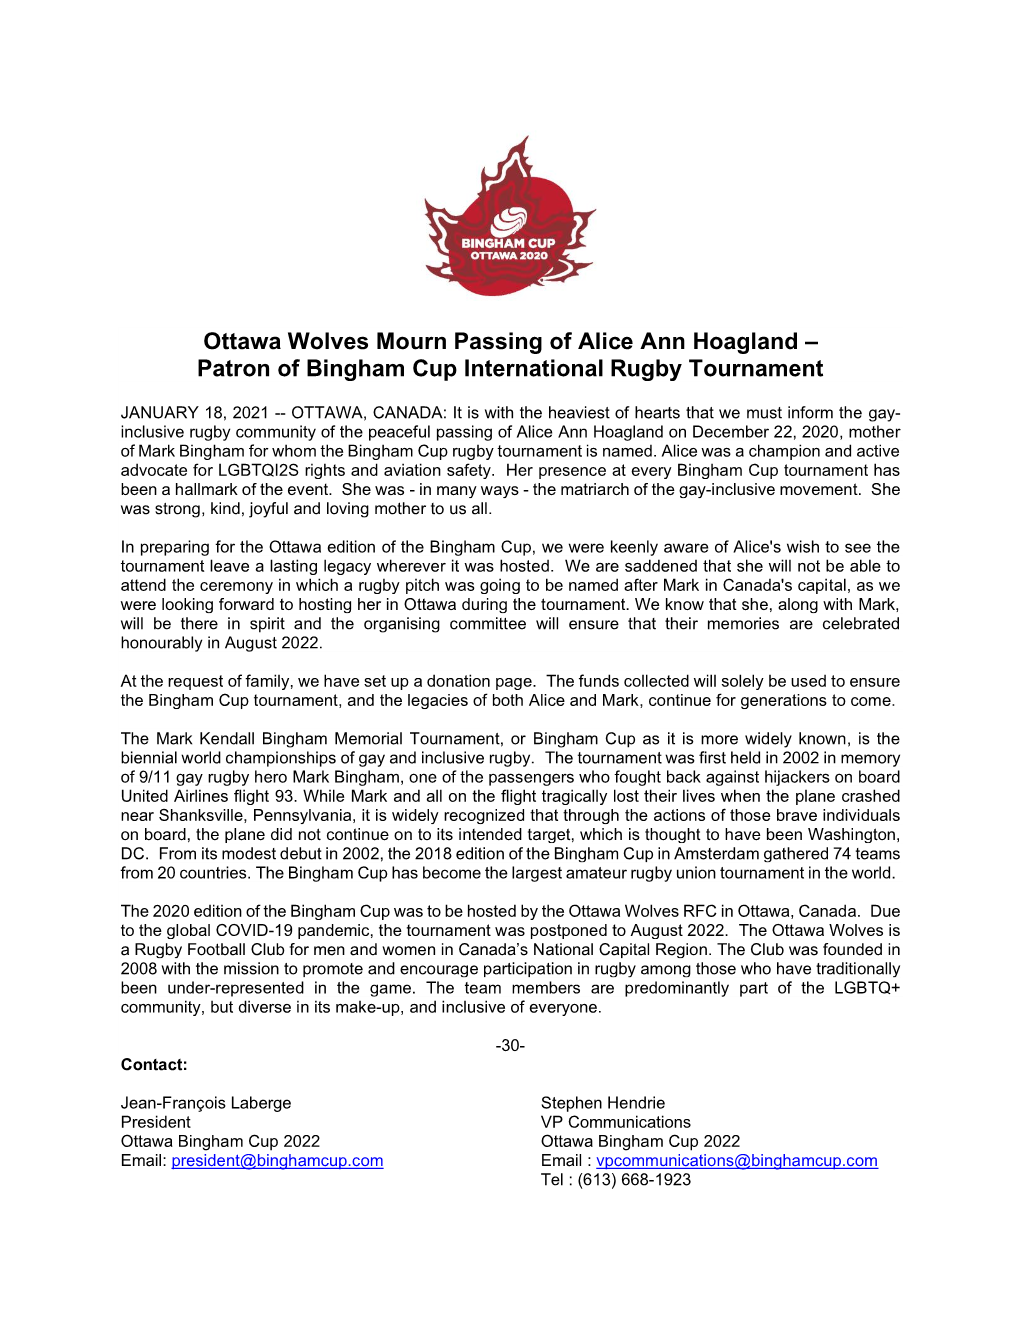 Ottawa Wolves Mourn Passing of Alice Ann Hoagland – Patron of Bingham Cup International Rugby Tournament